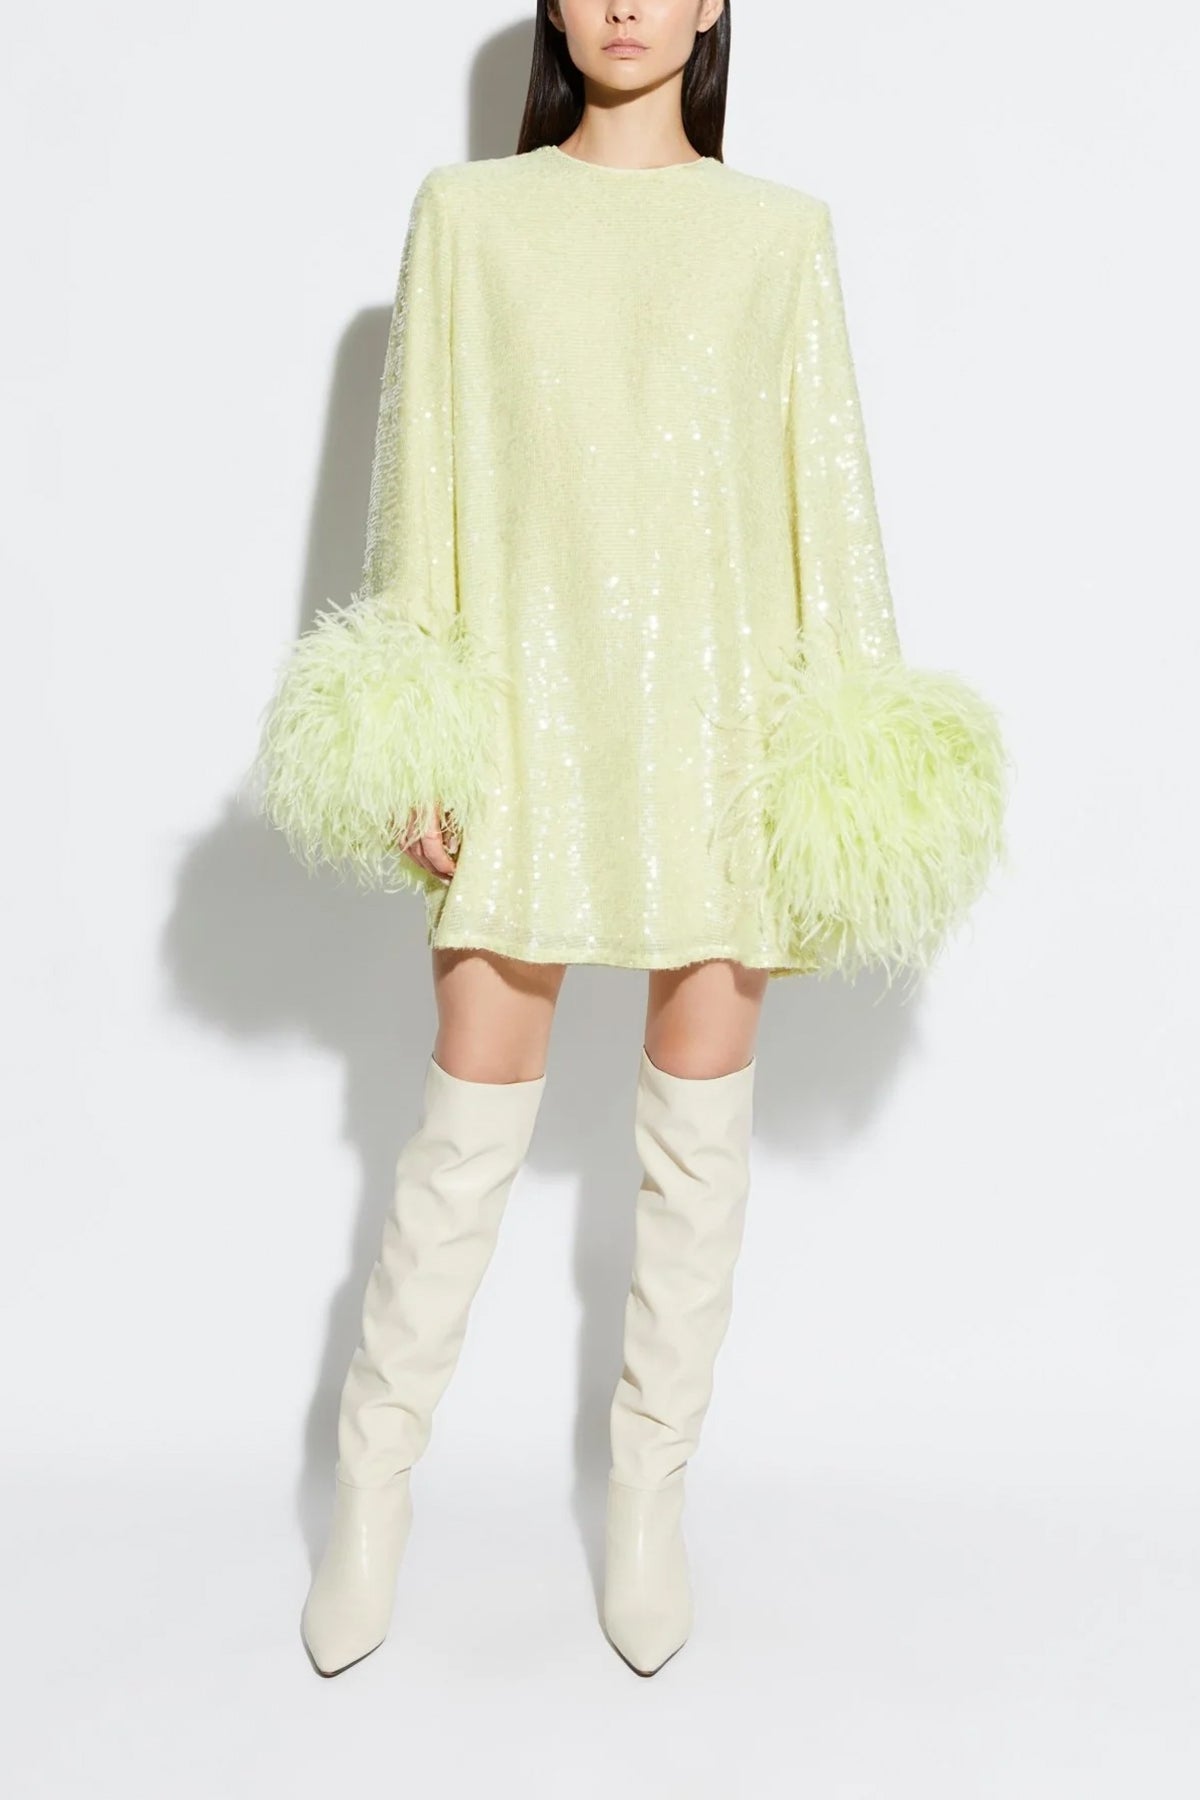 Sequin Dress with Feathers in Limon - shop-olivia.com